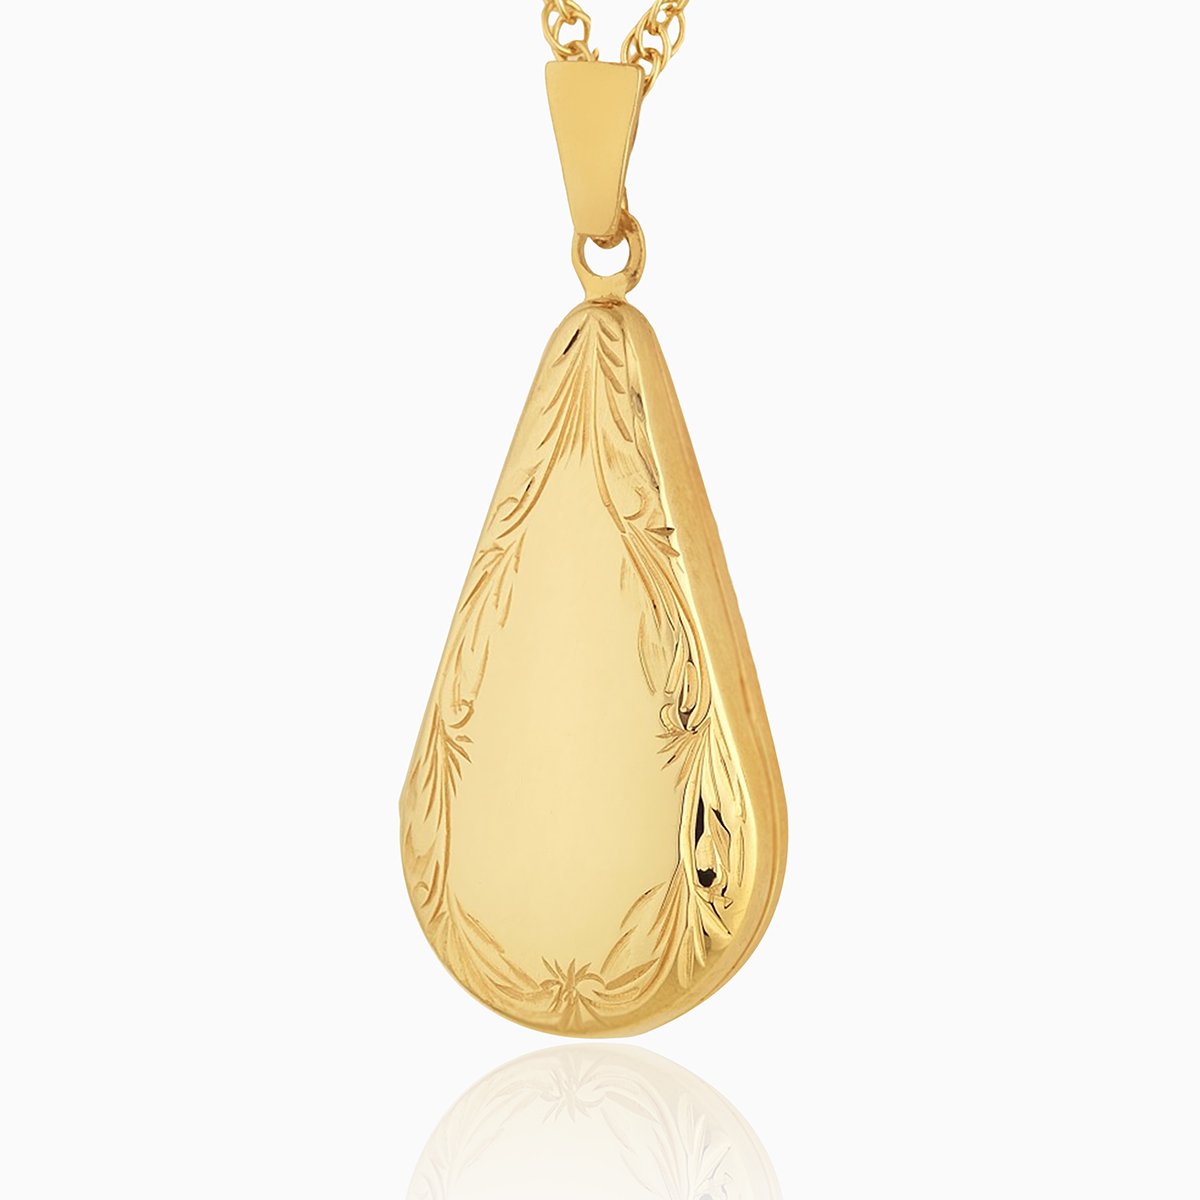 9 ct gold teardrop shaped locket with an engraved border on a 9 ct gold curb chain